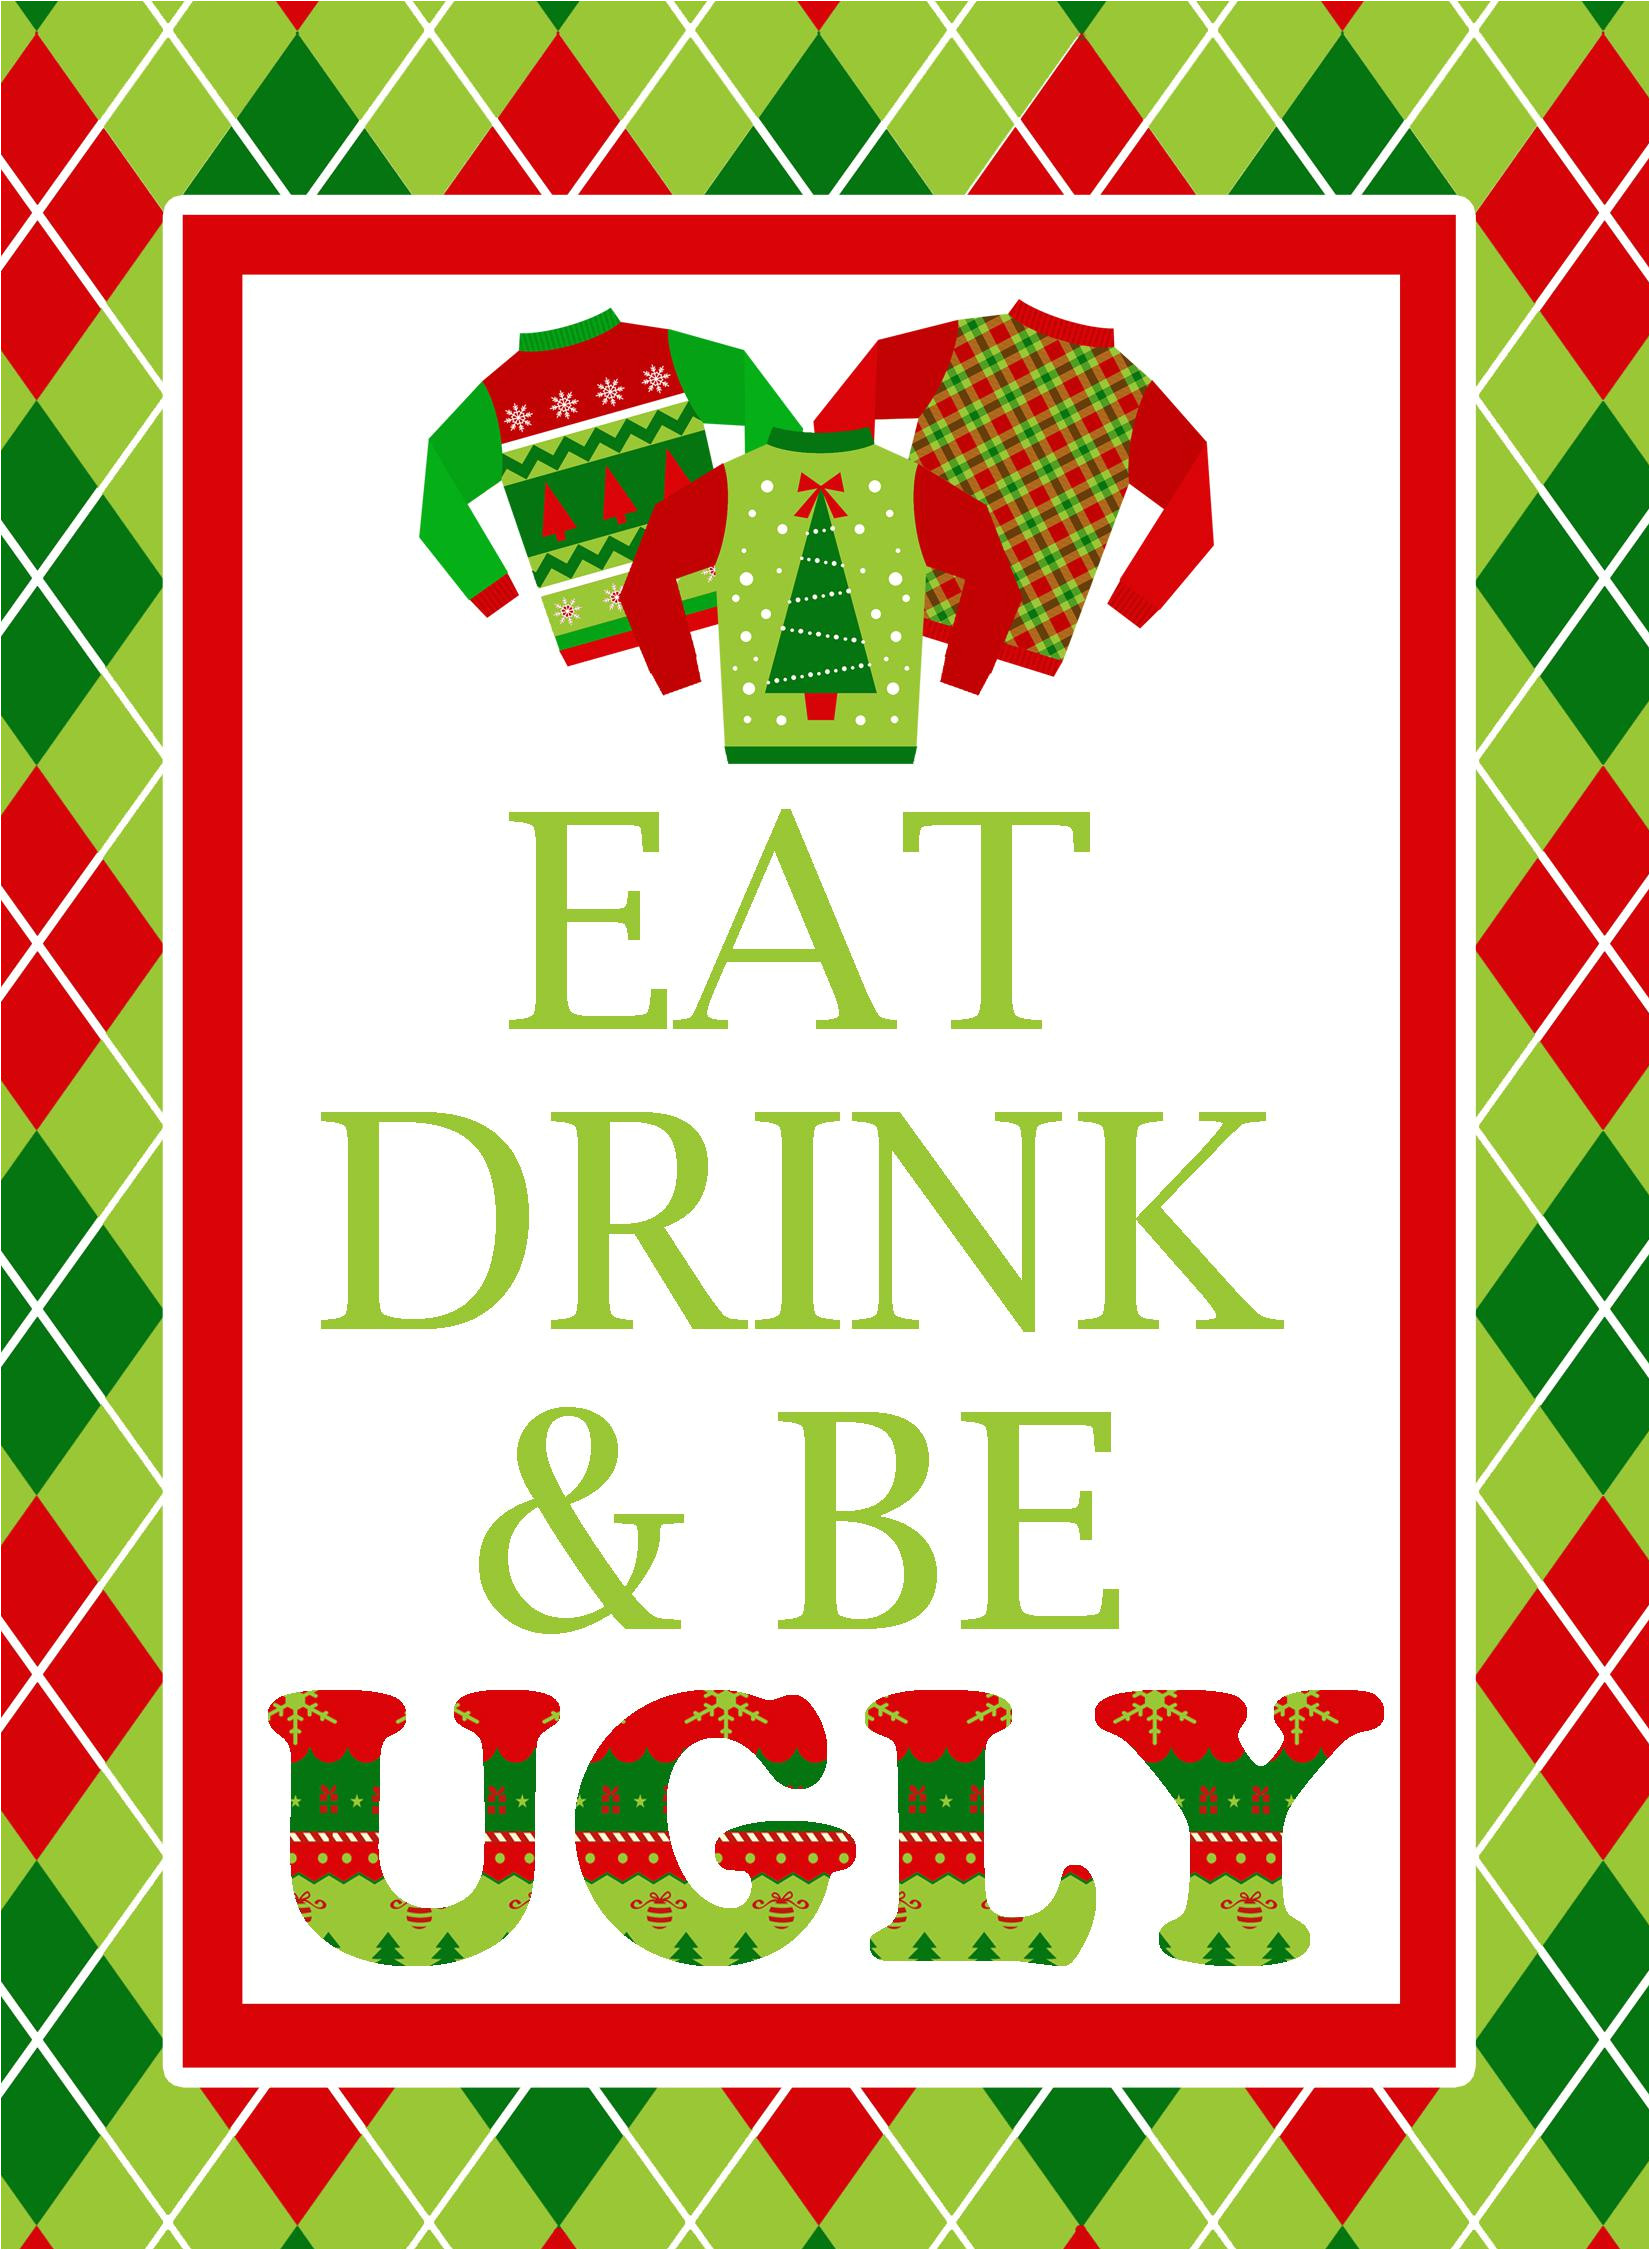 Ugly Sweater Party Invitation Template Free Word Ugly Sweater Party Invitation Template Free Word